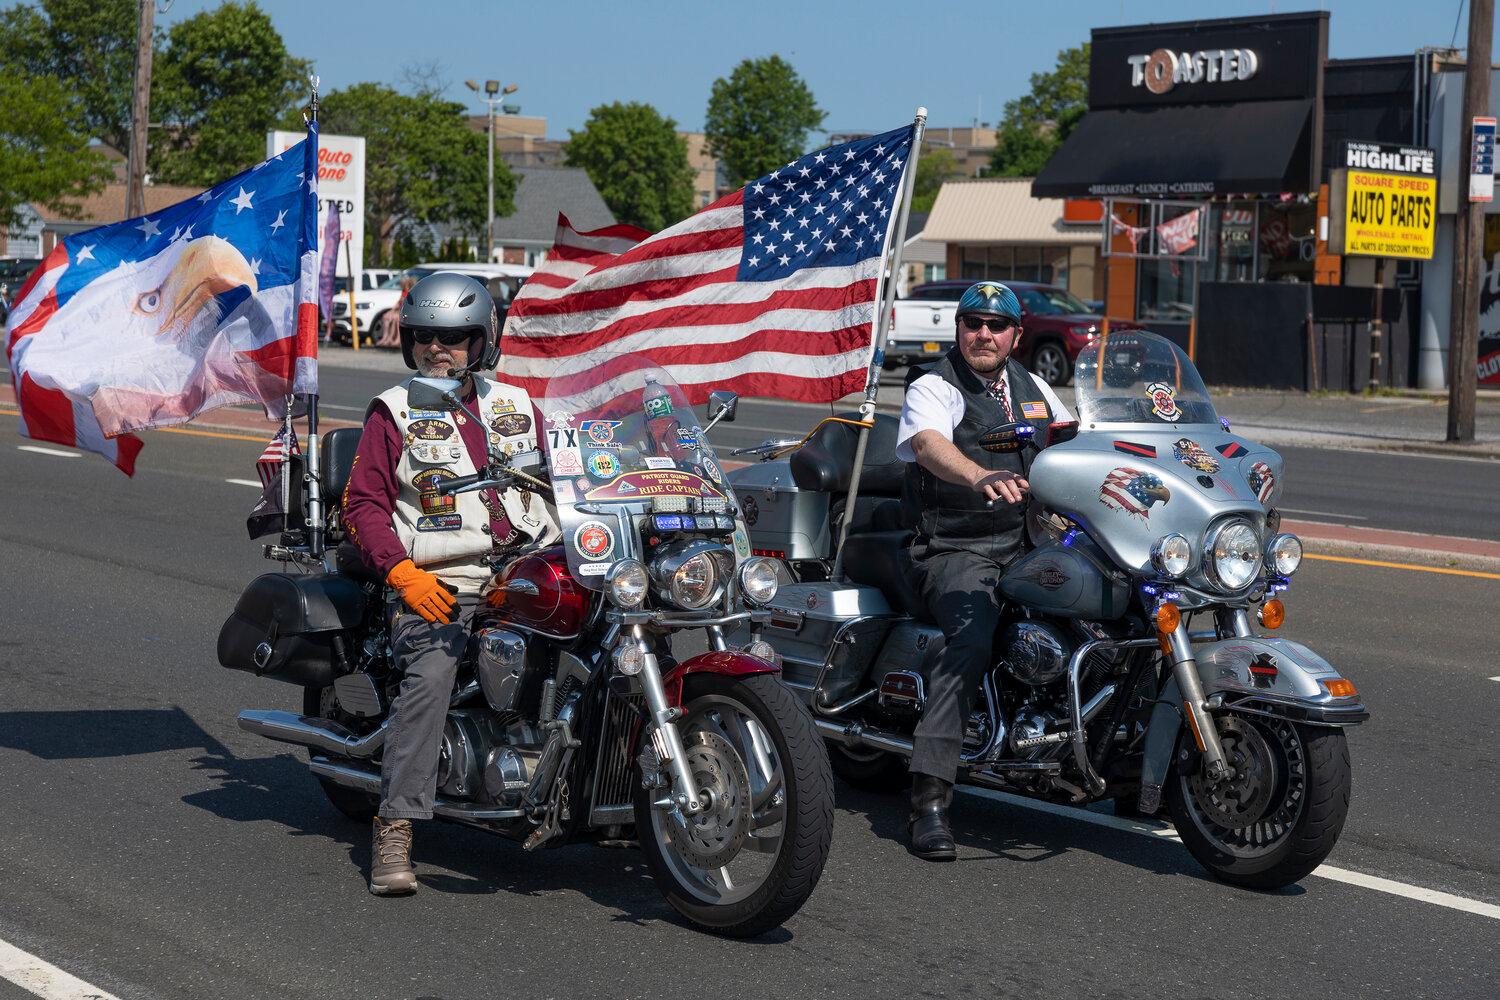 Members of American Legion Post 1082 out of East Meadow rode their motorcycles in the parade.